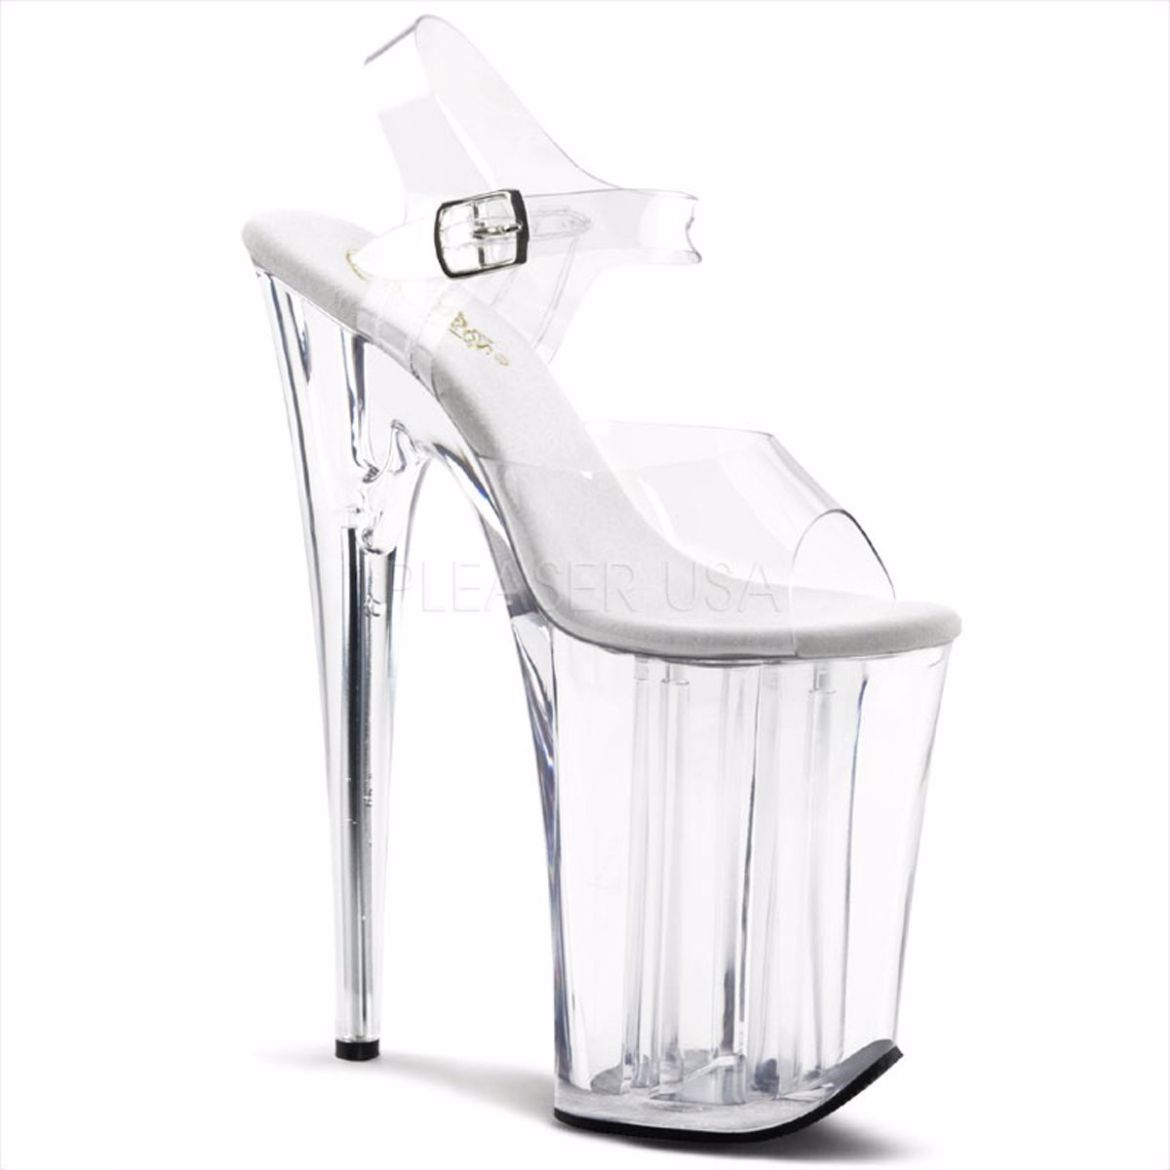 Product image of Pleaser Infinity-908 Clear/Clear, 9 inch (22.9 cm) Heel, 5 1/4 inch (13.3 cm) Platform Sandal Shoes